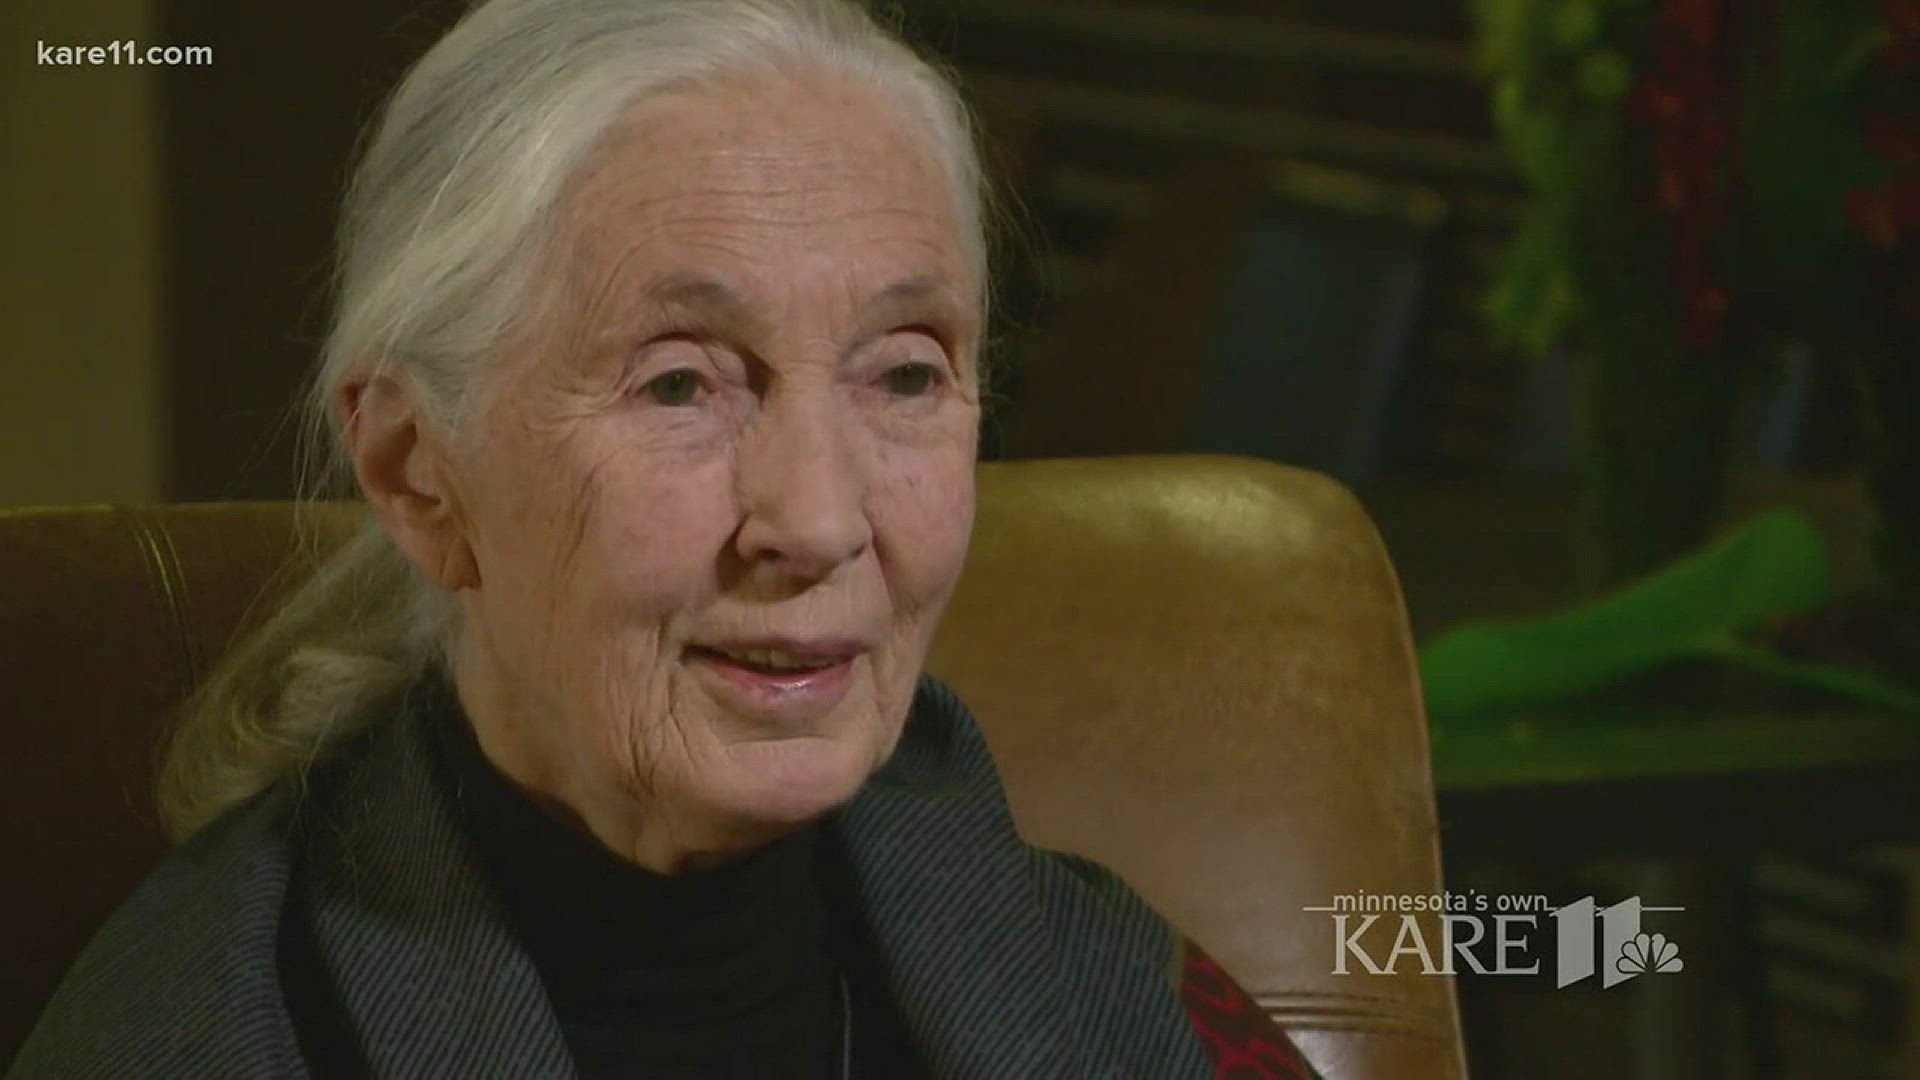 Sven had the chance to sit down with Dr. Jane Goodall, one of his idols in science, during her visit to Minnesota.